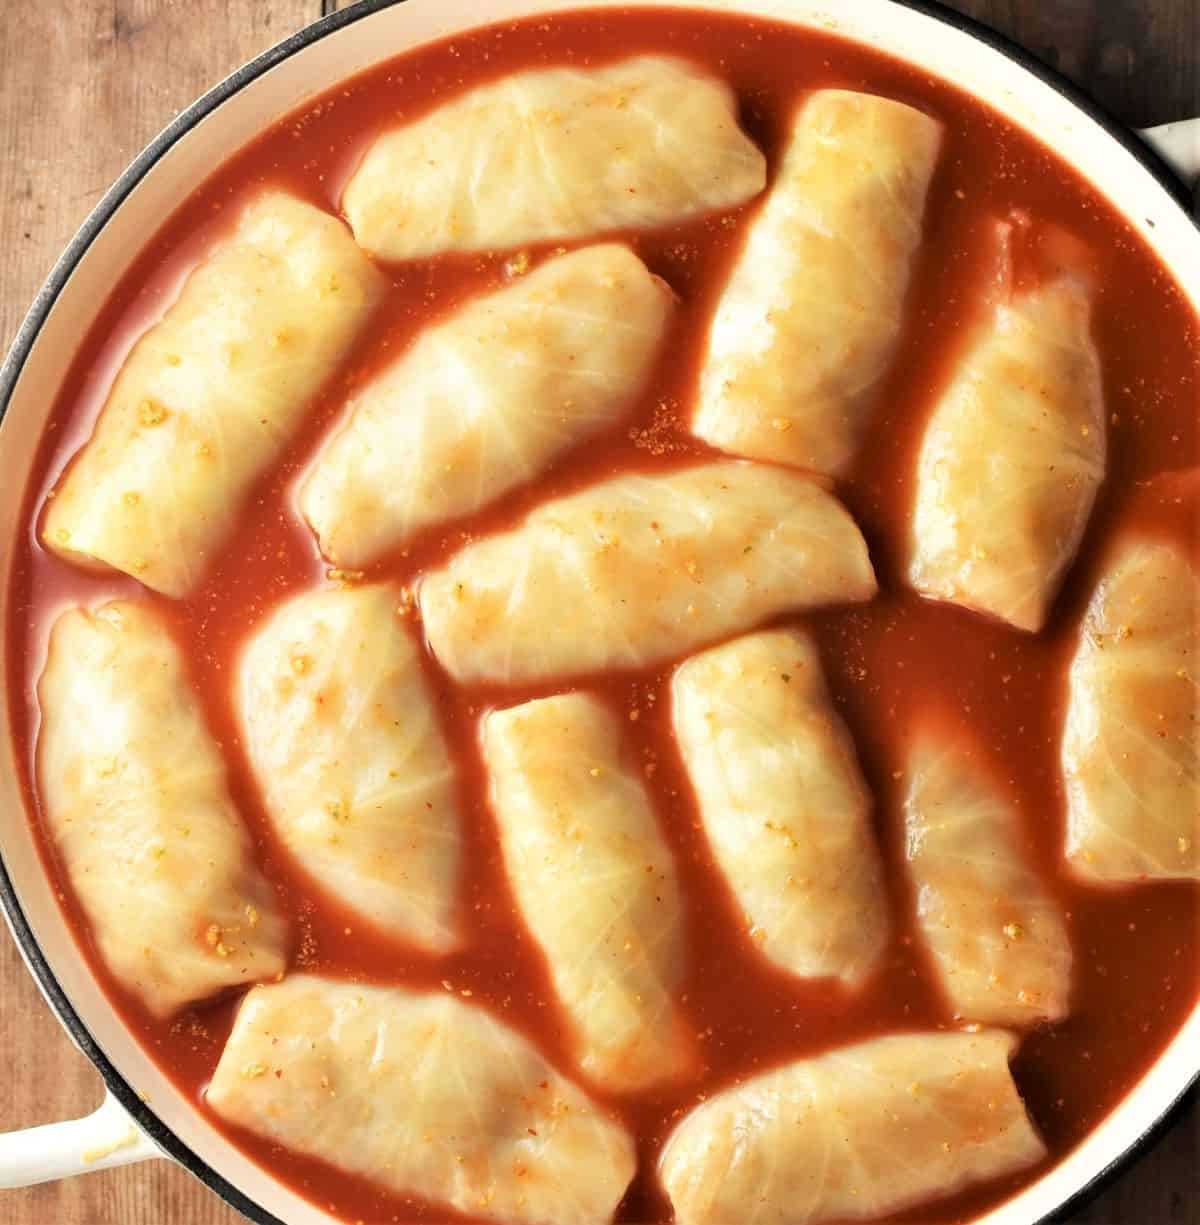 Cabbage rolls with tomato sauce in large pan.